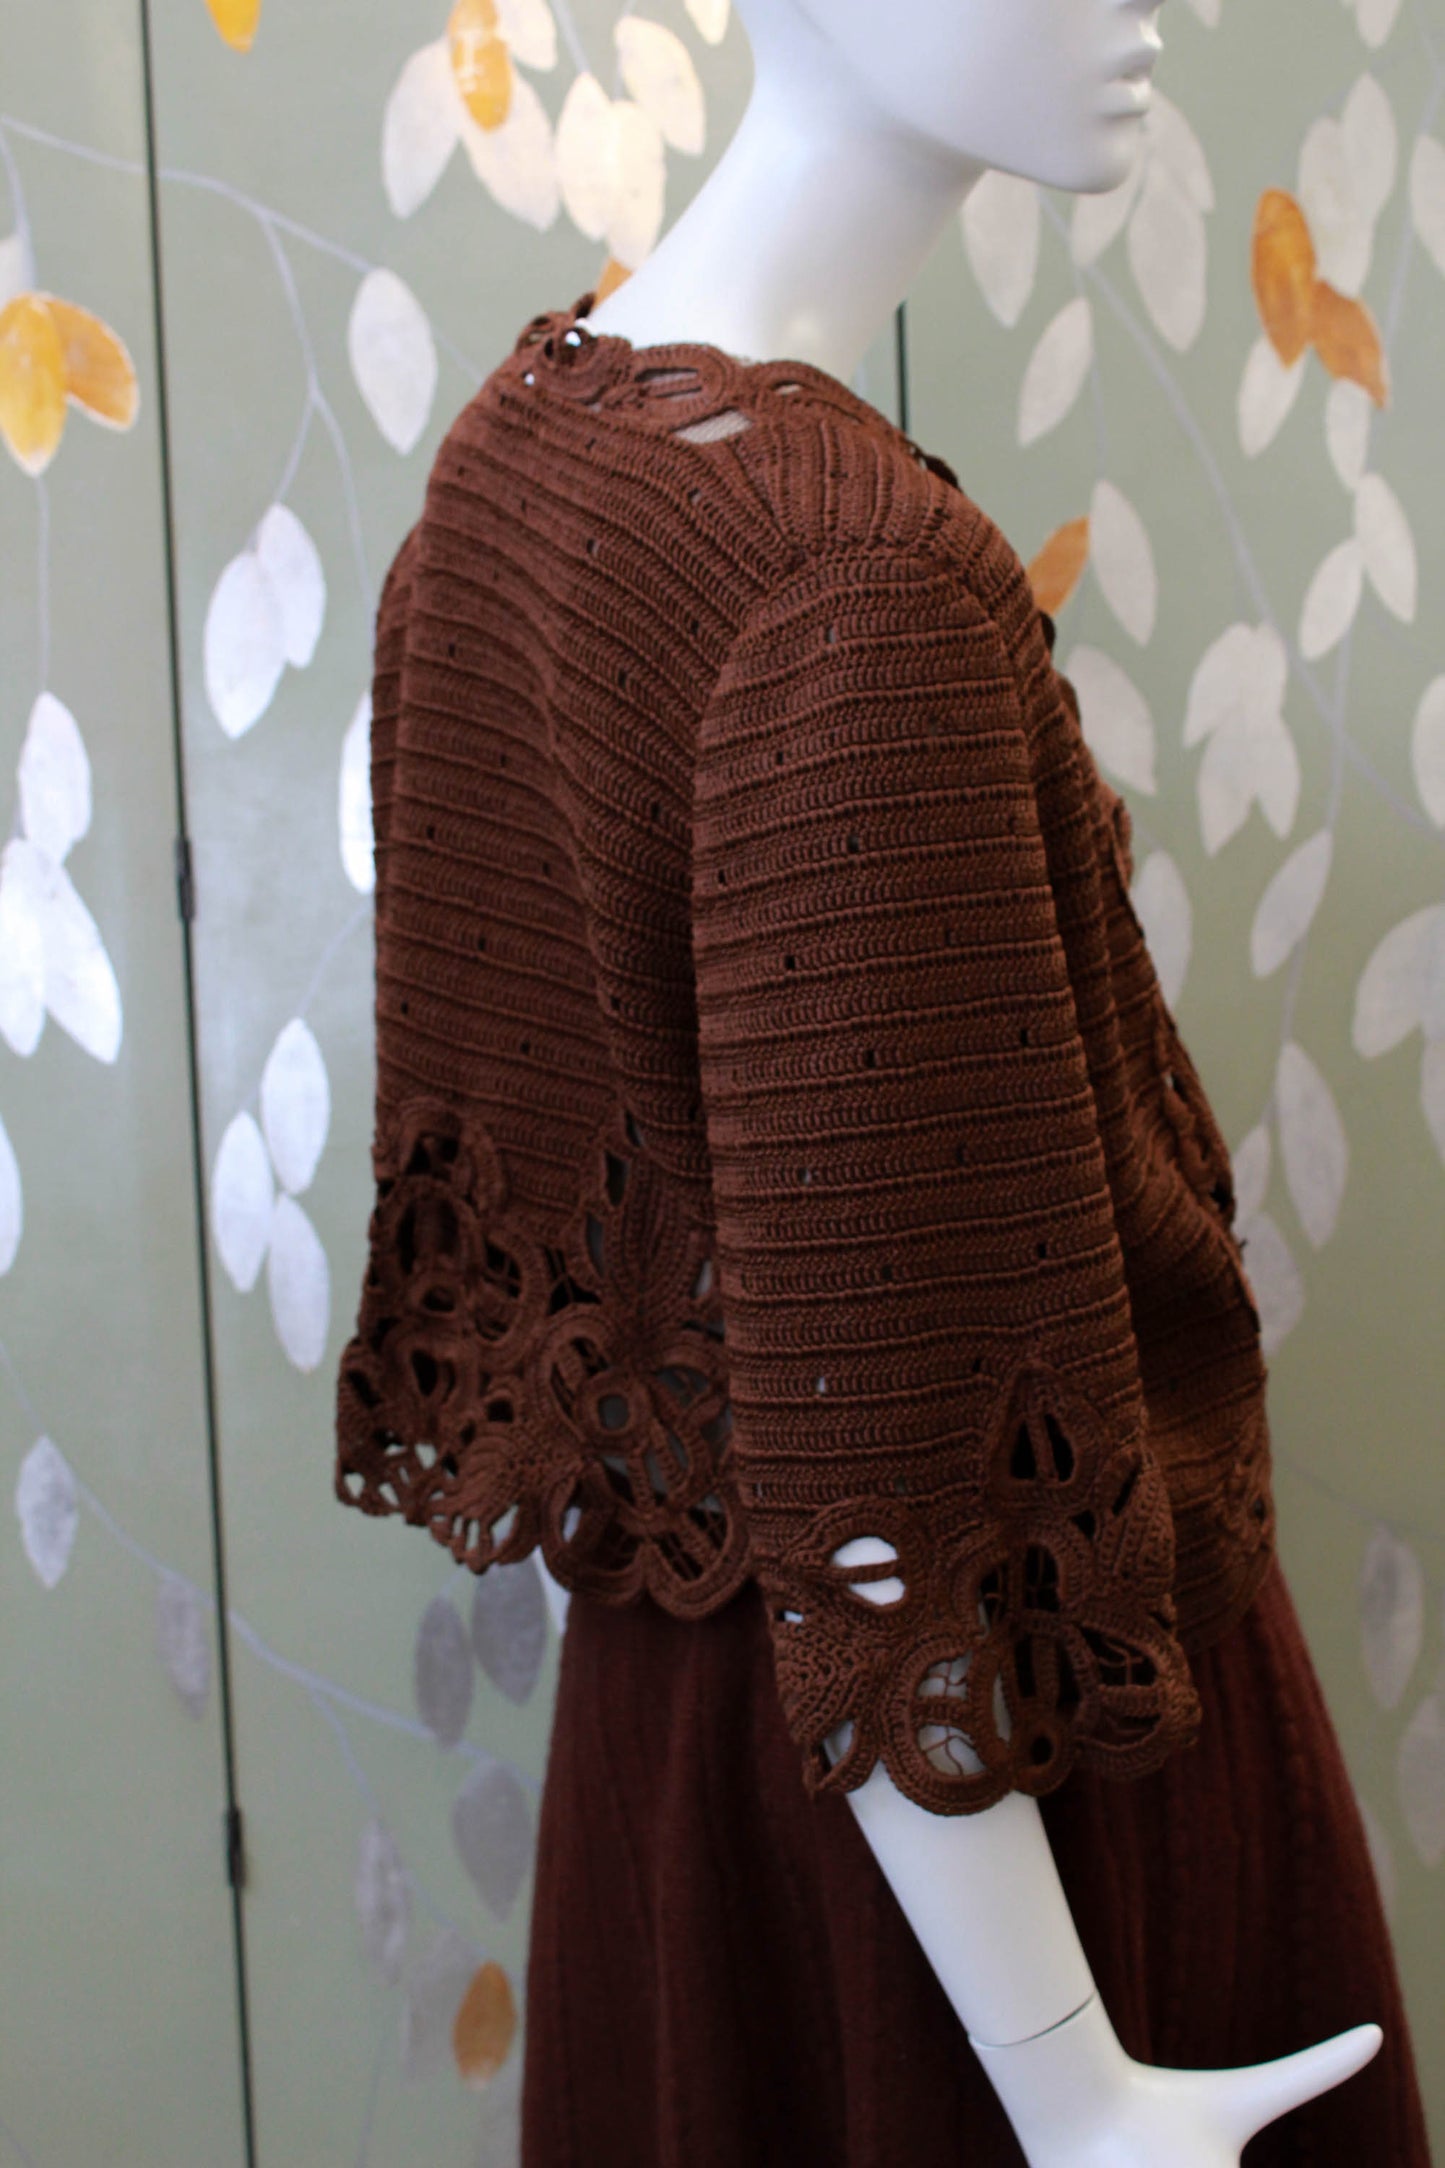 oscar de la renta brown silk knitted bolero cardigan with openwork embroidery down front and sleeve hems designer vintage